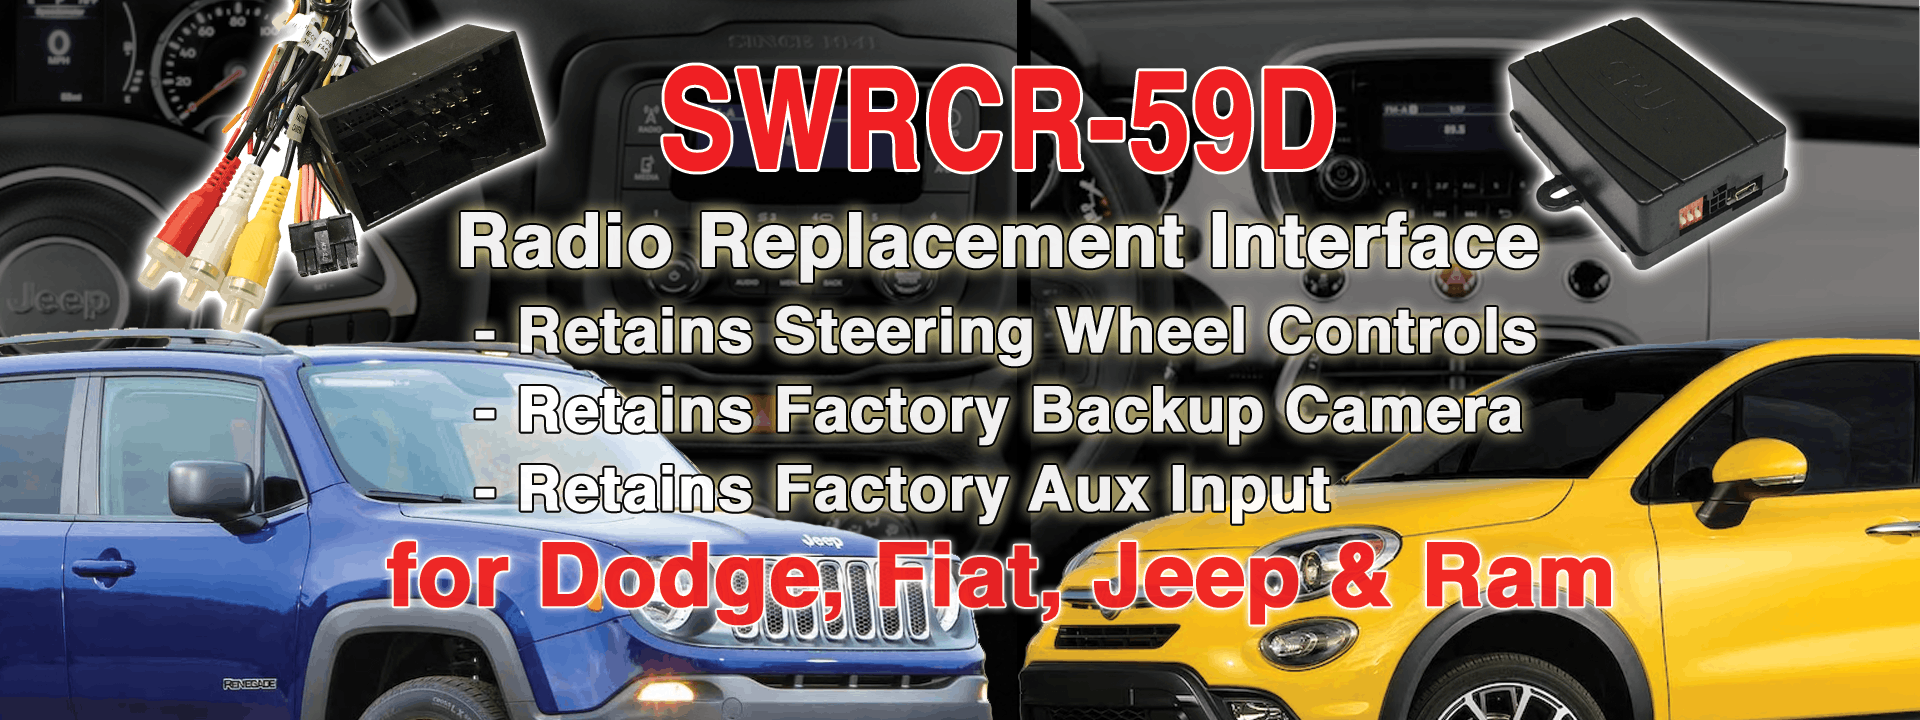 SWRCR-59D  Radio Replacement w/ SWC Retention for Dodge, Fiat